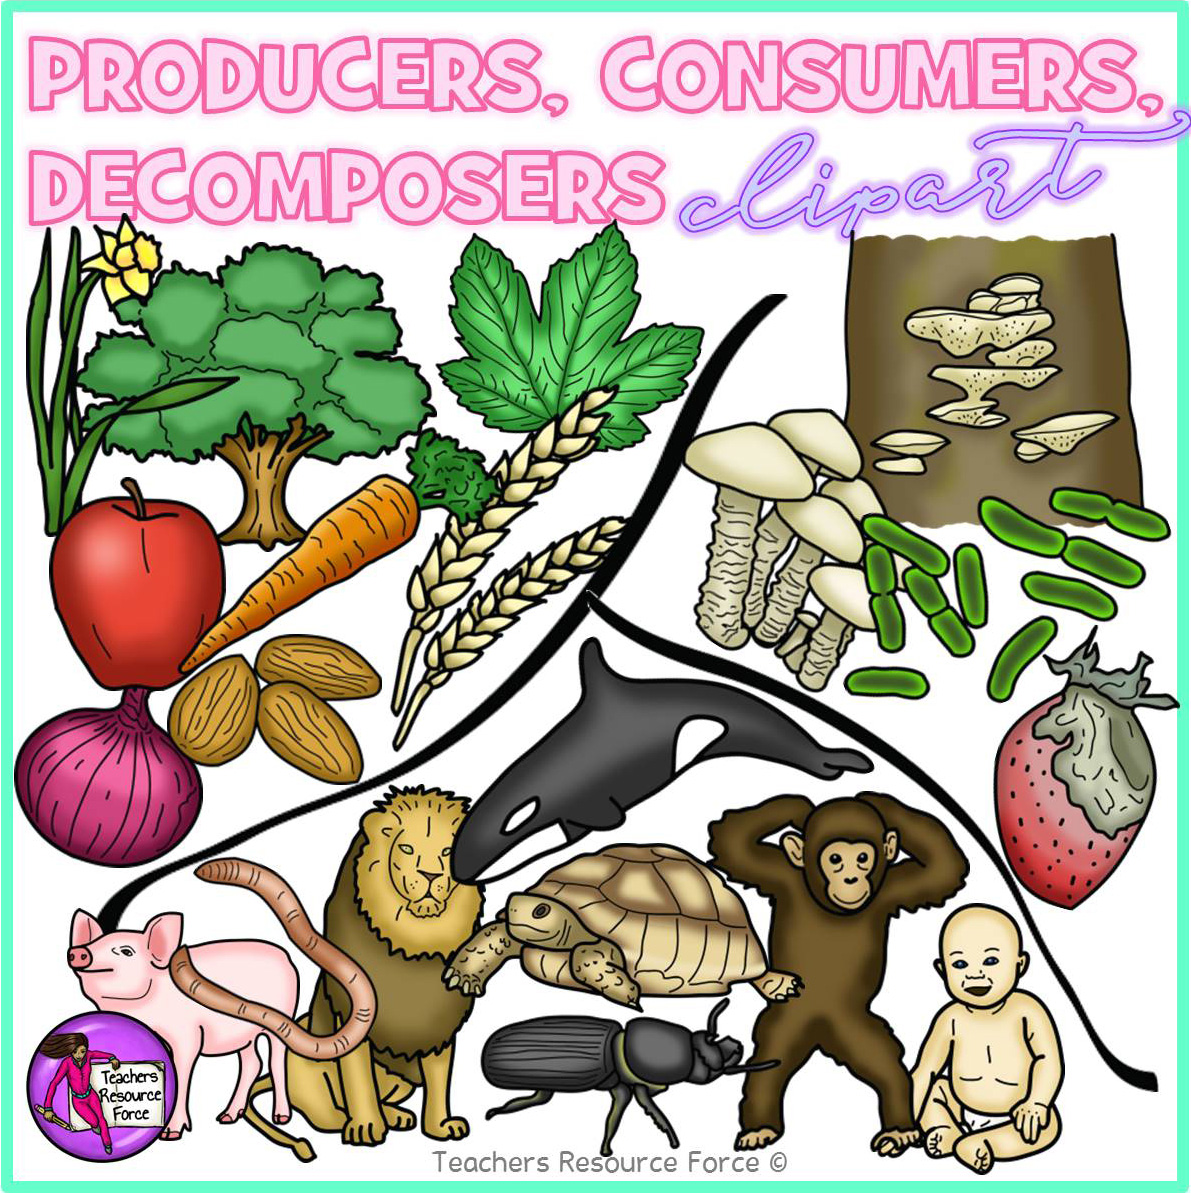 Bacteria clipart decomposer. Producers consumers decomposers bundle